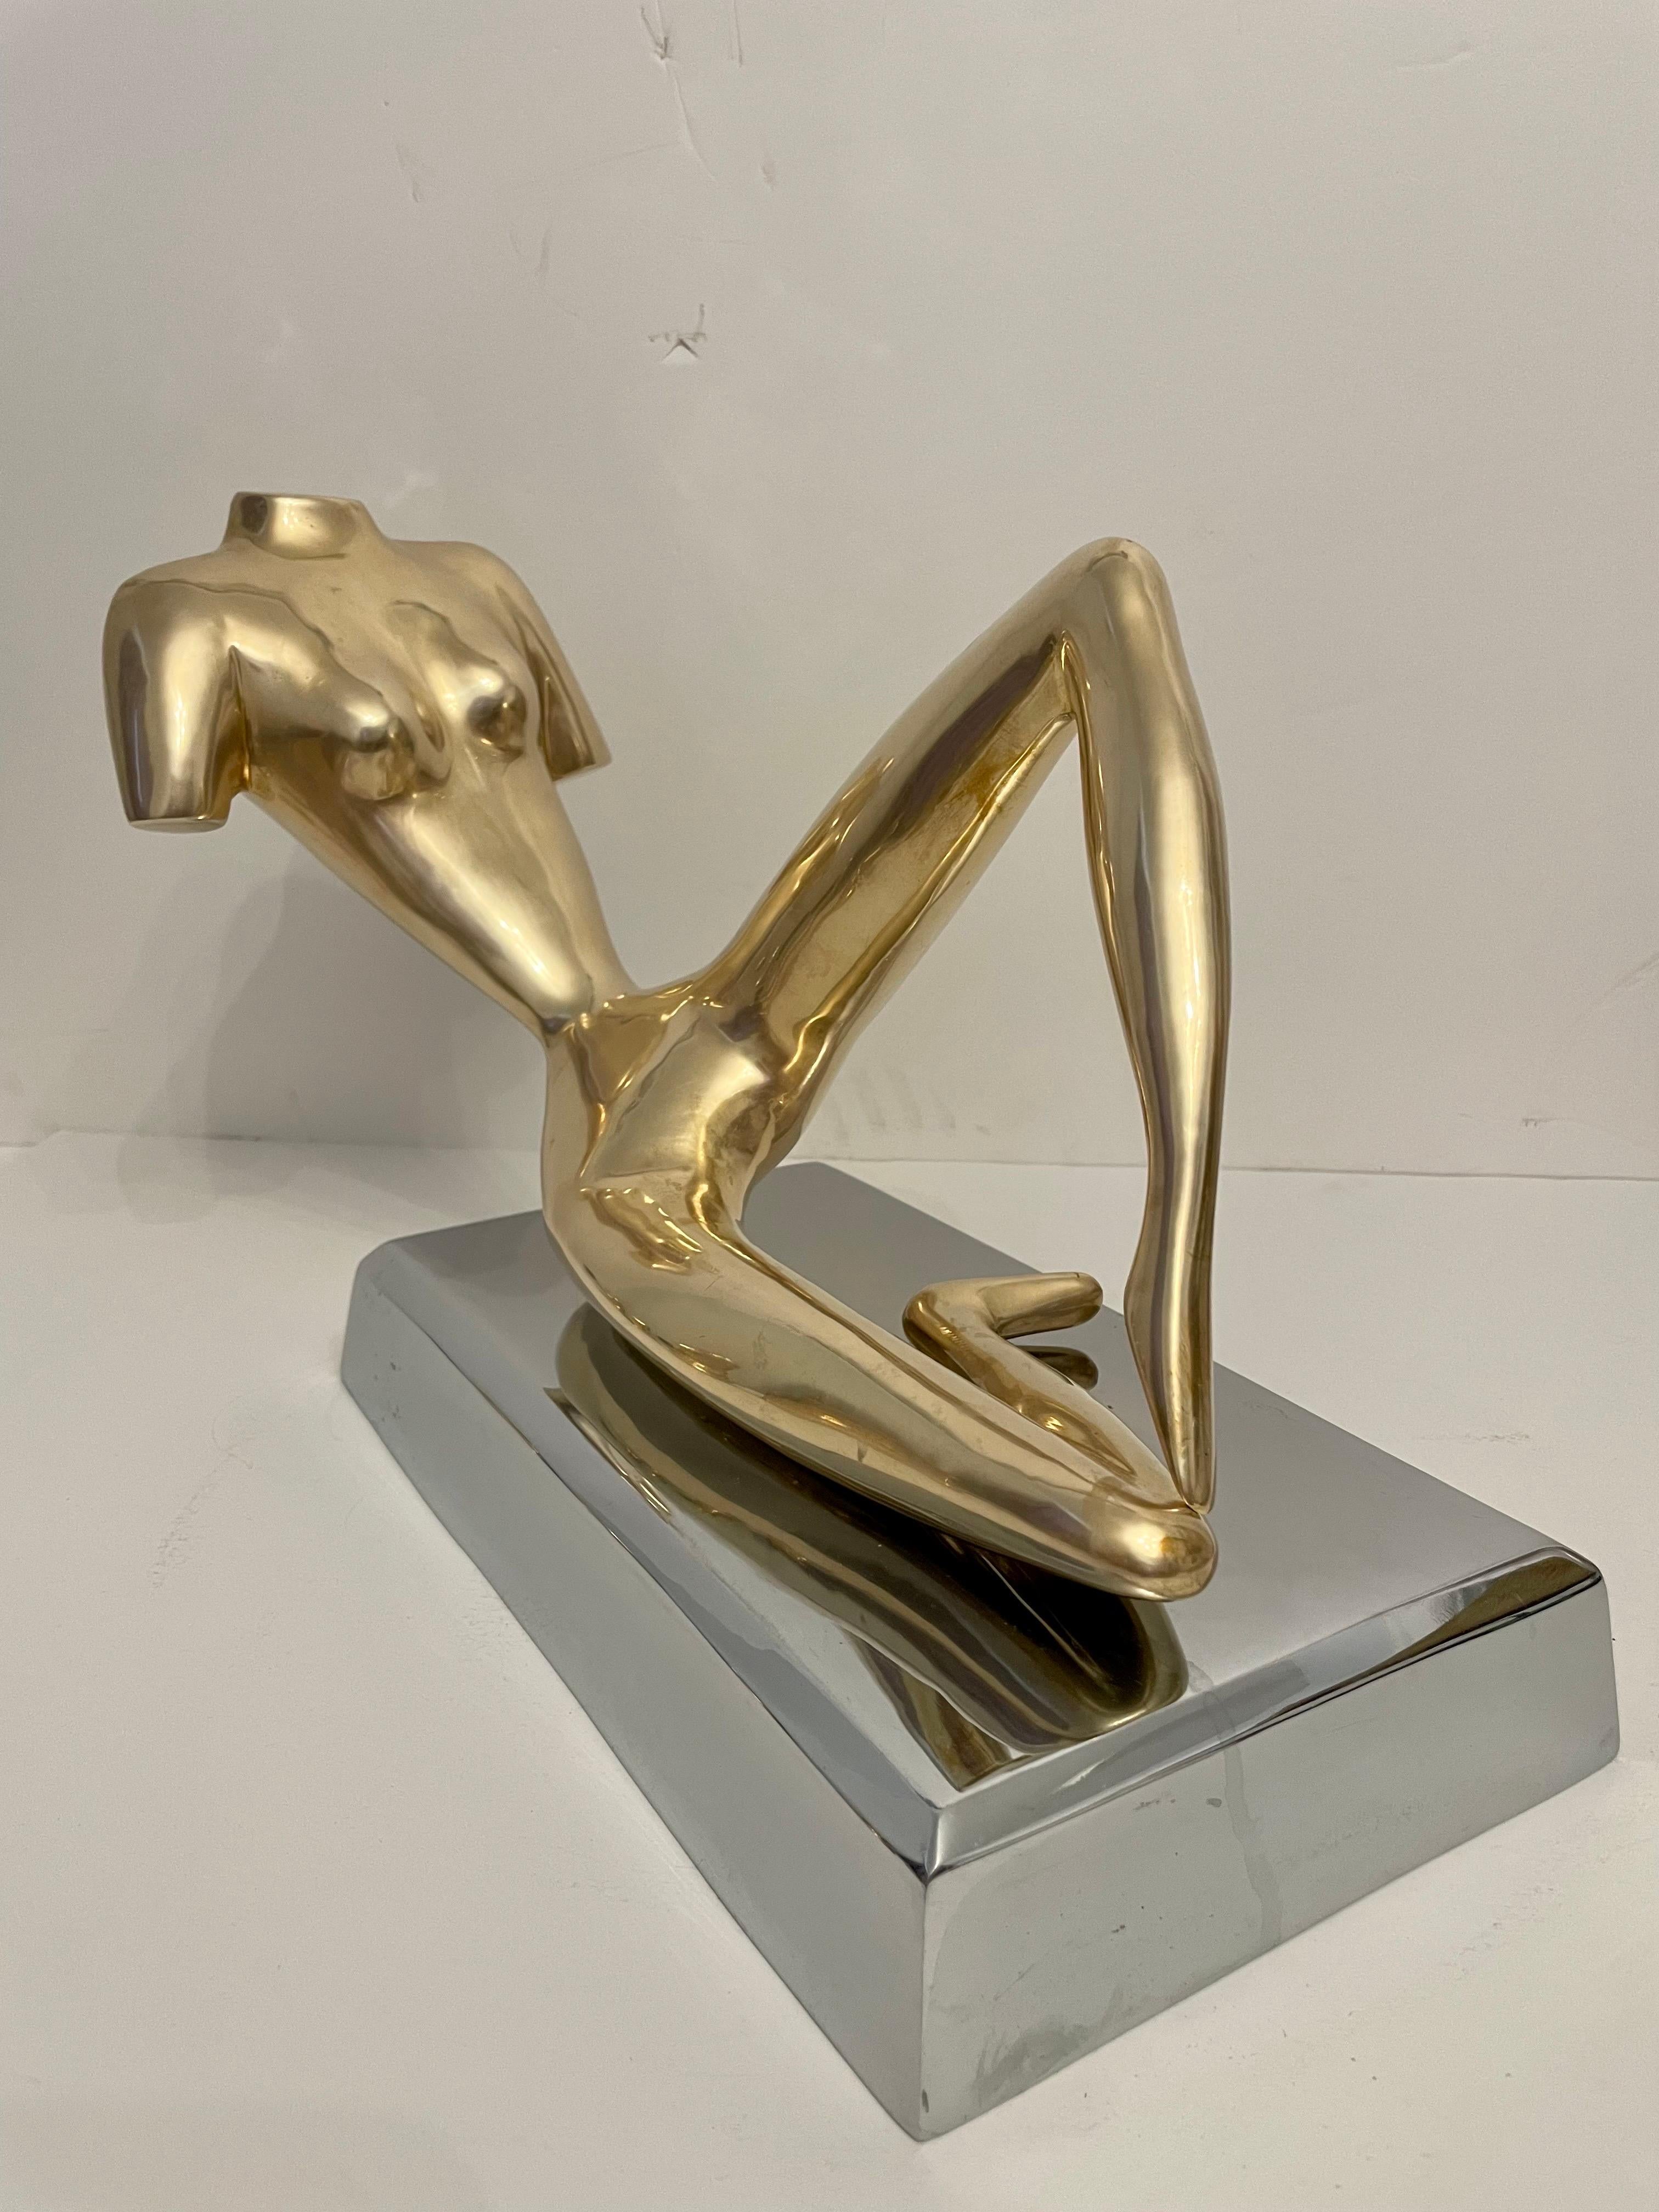 A very good quality decorative midcentury large reclining nude brass figural sculpture on cast, thick, beveled aluminum base, inspired by the iconic style of renowned sculptor Jean Hans Arp (1886 - 1966). This captivating piece seamlessly blends